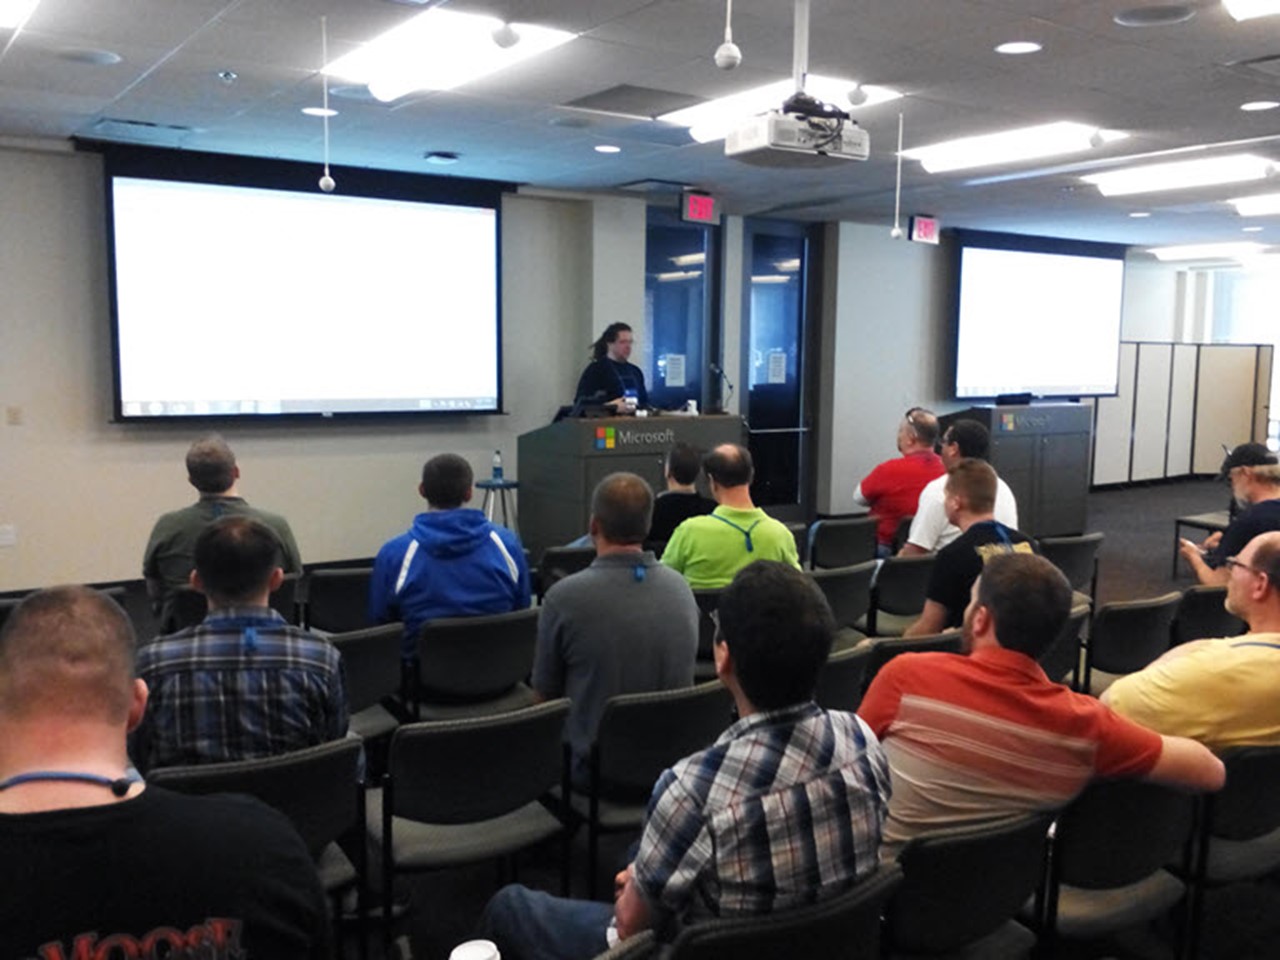 Jim Christopher "hacking" PowerShell at the PowerShell Summit in North America. (Image Credit: Jeff Hicks)